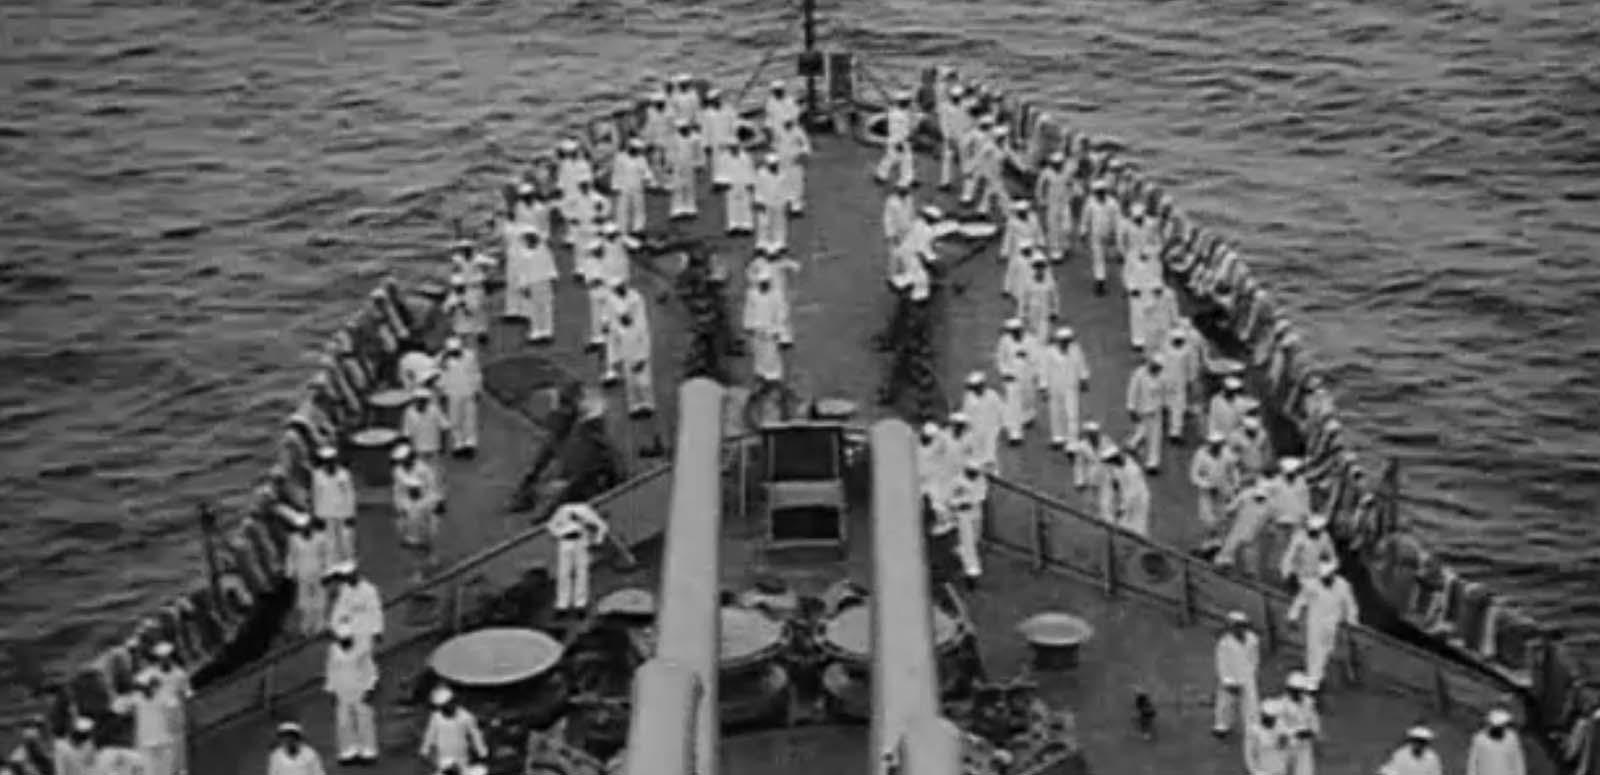 A look down at sailors assembled on a US navy destroyer in 1915